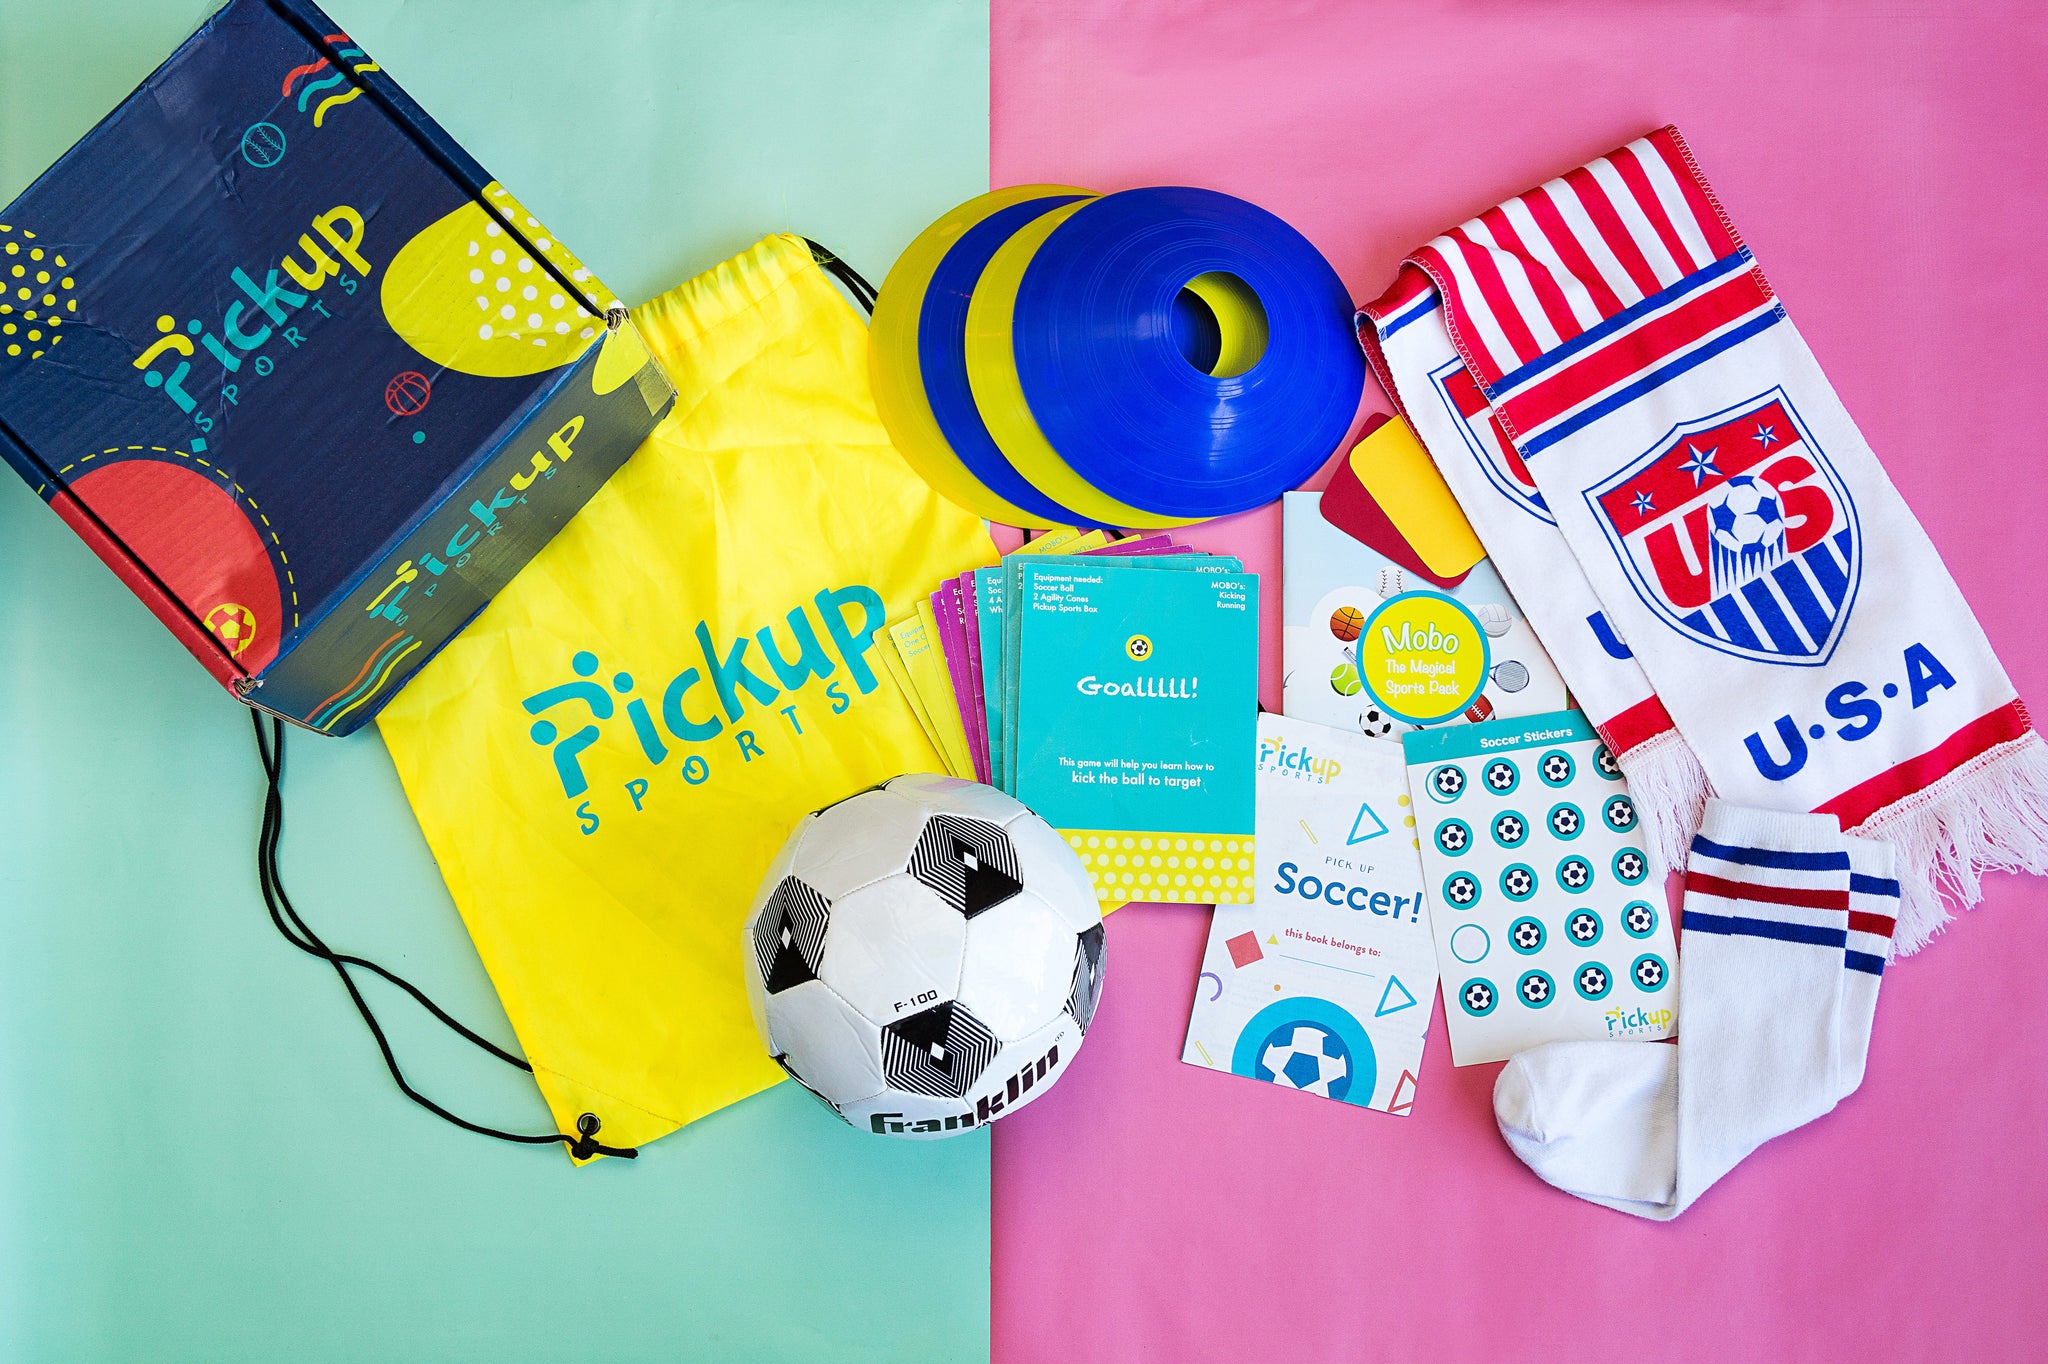 Soccer Box Giveaway! Enter to win (Nov 13-22, 2019)